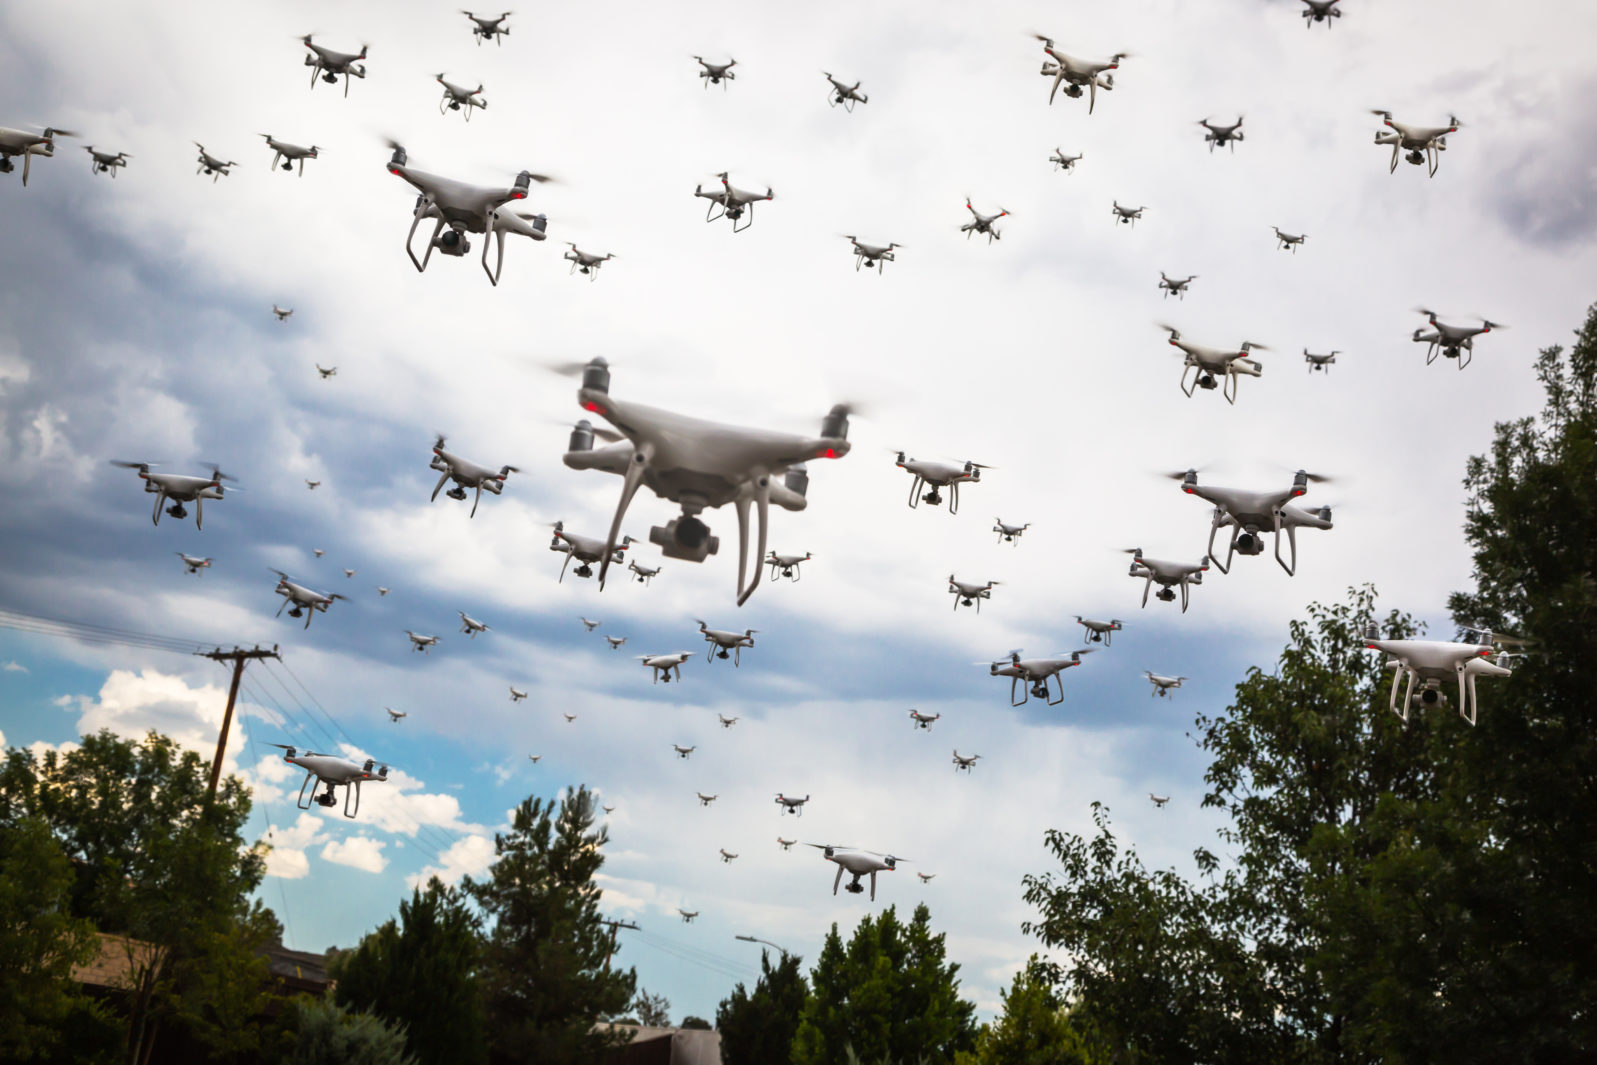 dozens of drones swarm in the cloudy sky stockpack adobe stock 1597x1065 1